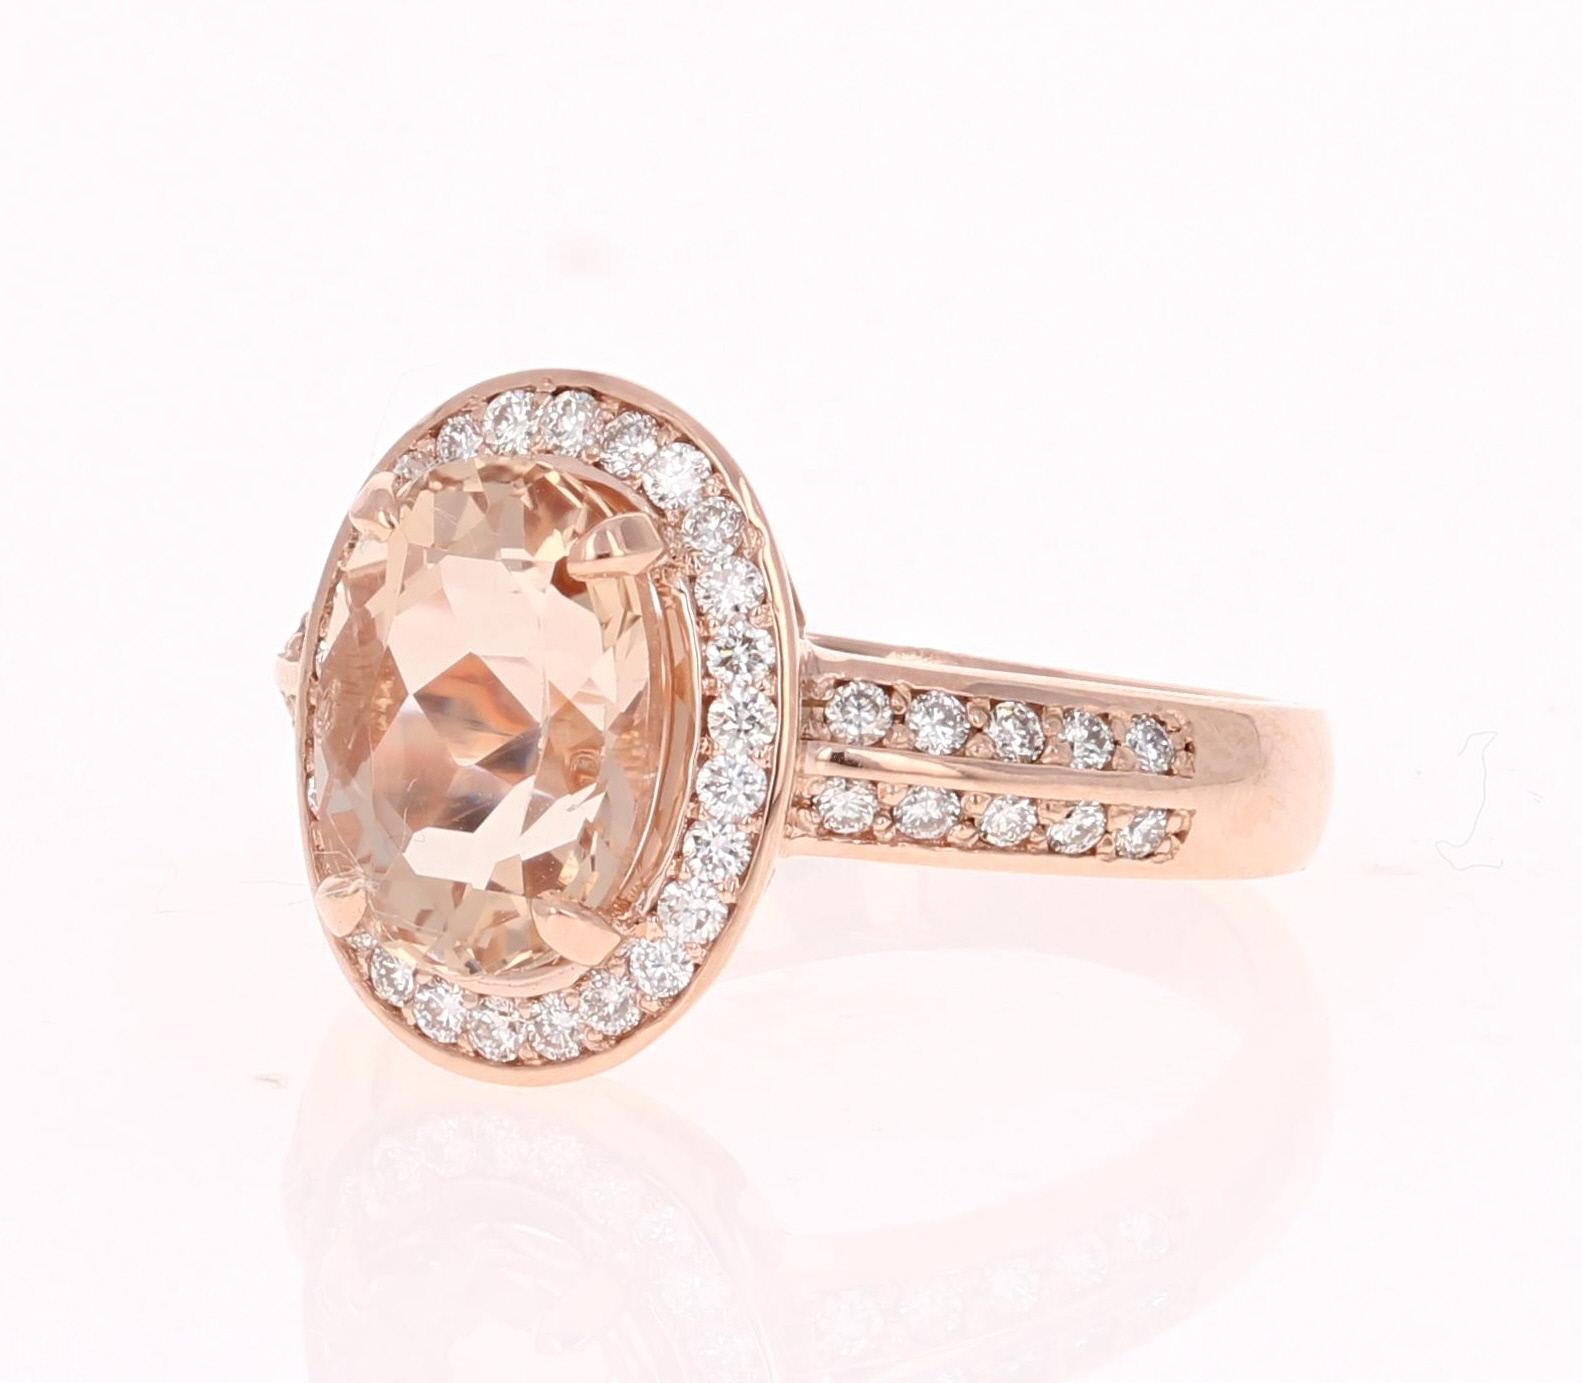 This ring is a 14K Rose Gold Ring which has a 2.81 carat Oval Cut Morganite in the center of the ring.  This ring is surrounded by 46 Round Cut Diamonds that weigh a total of 0.48 carats (Clarity: VS2, Color: H).  The total carat weight of the ring